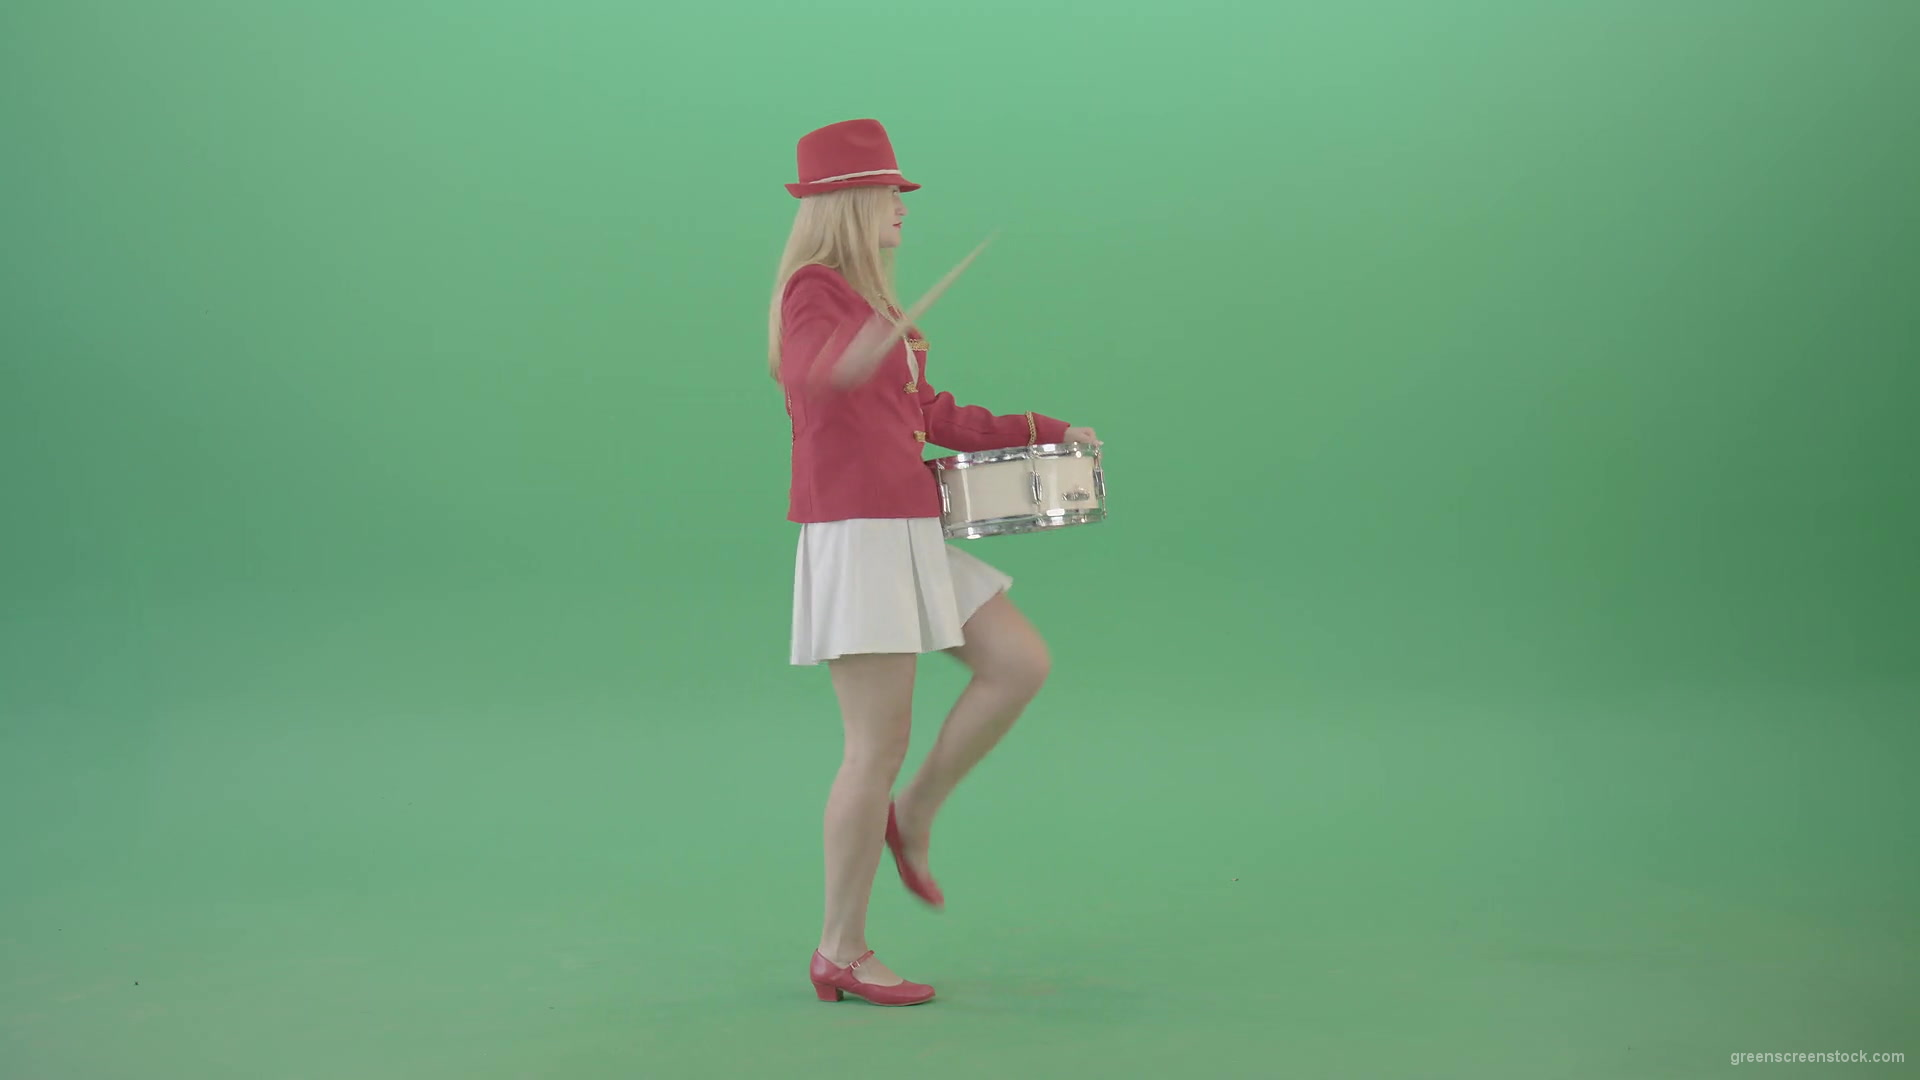 Side-view-marching-girl-play-white-snare-drum-in-red-uniform-on-green-screen-Video-Footage-1920_007 Green Screen Stock